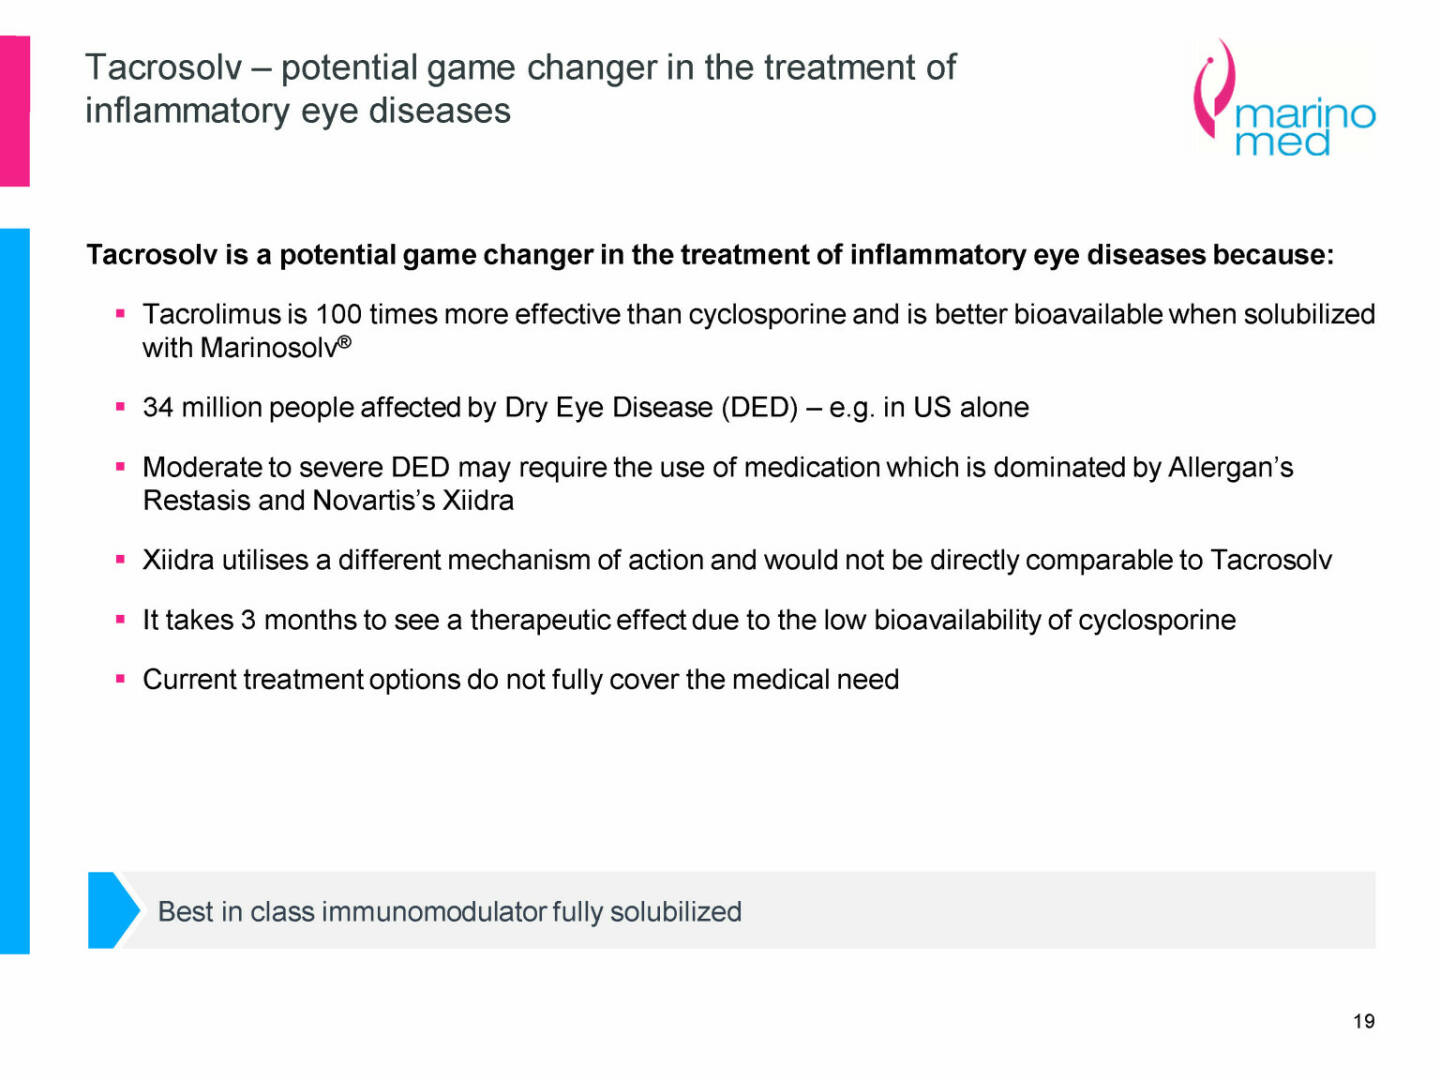 Marinomed - Tacrosolv – potential game changer in the treatment of inflammatory eye diseases 